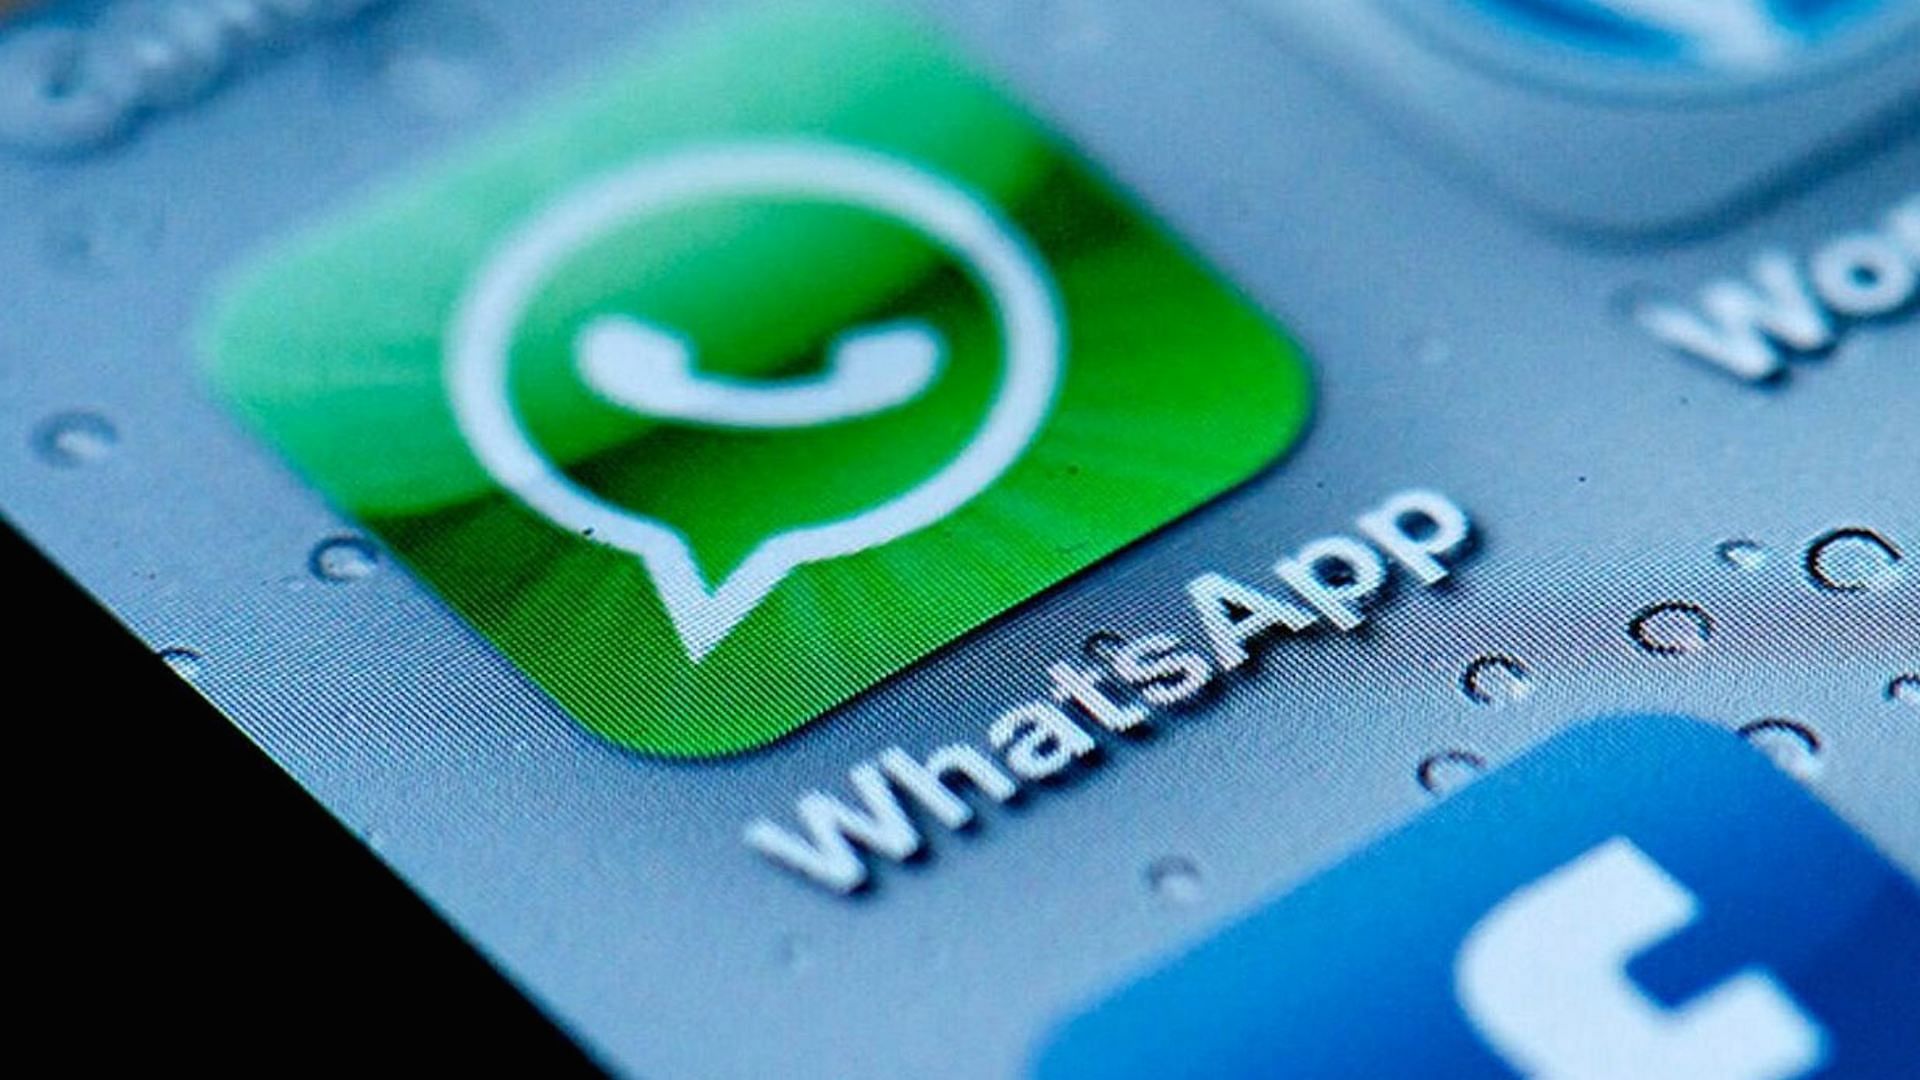 WhatsApp is yet to fix a bug pointed out by an Israeli security firm Check Point over a year ago.